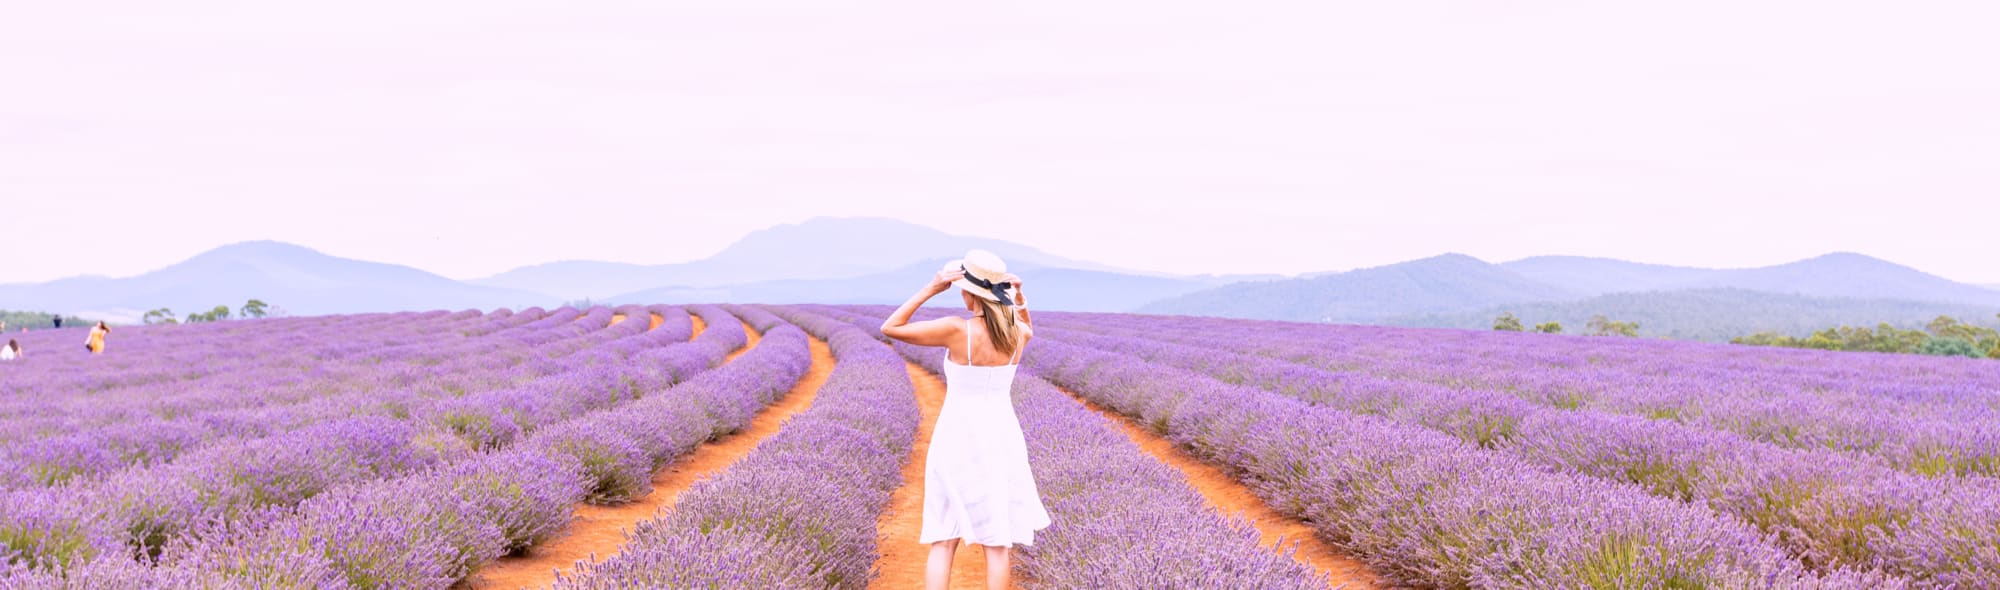 woman standing in a field of lavender flowers